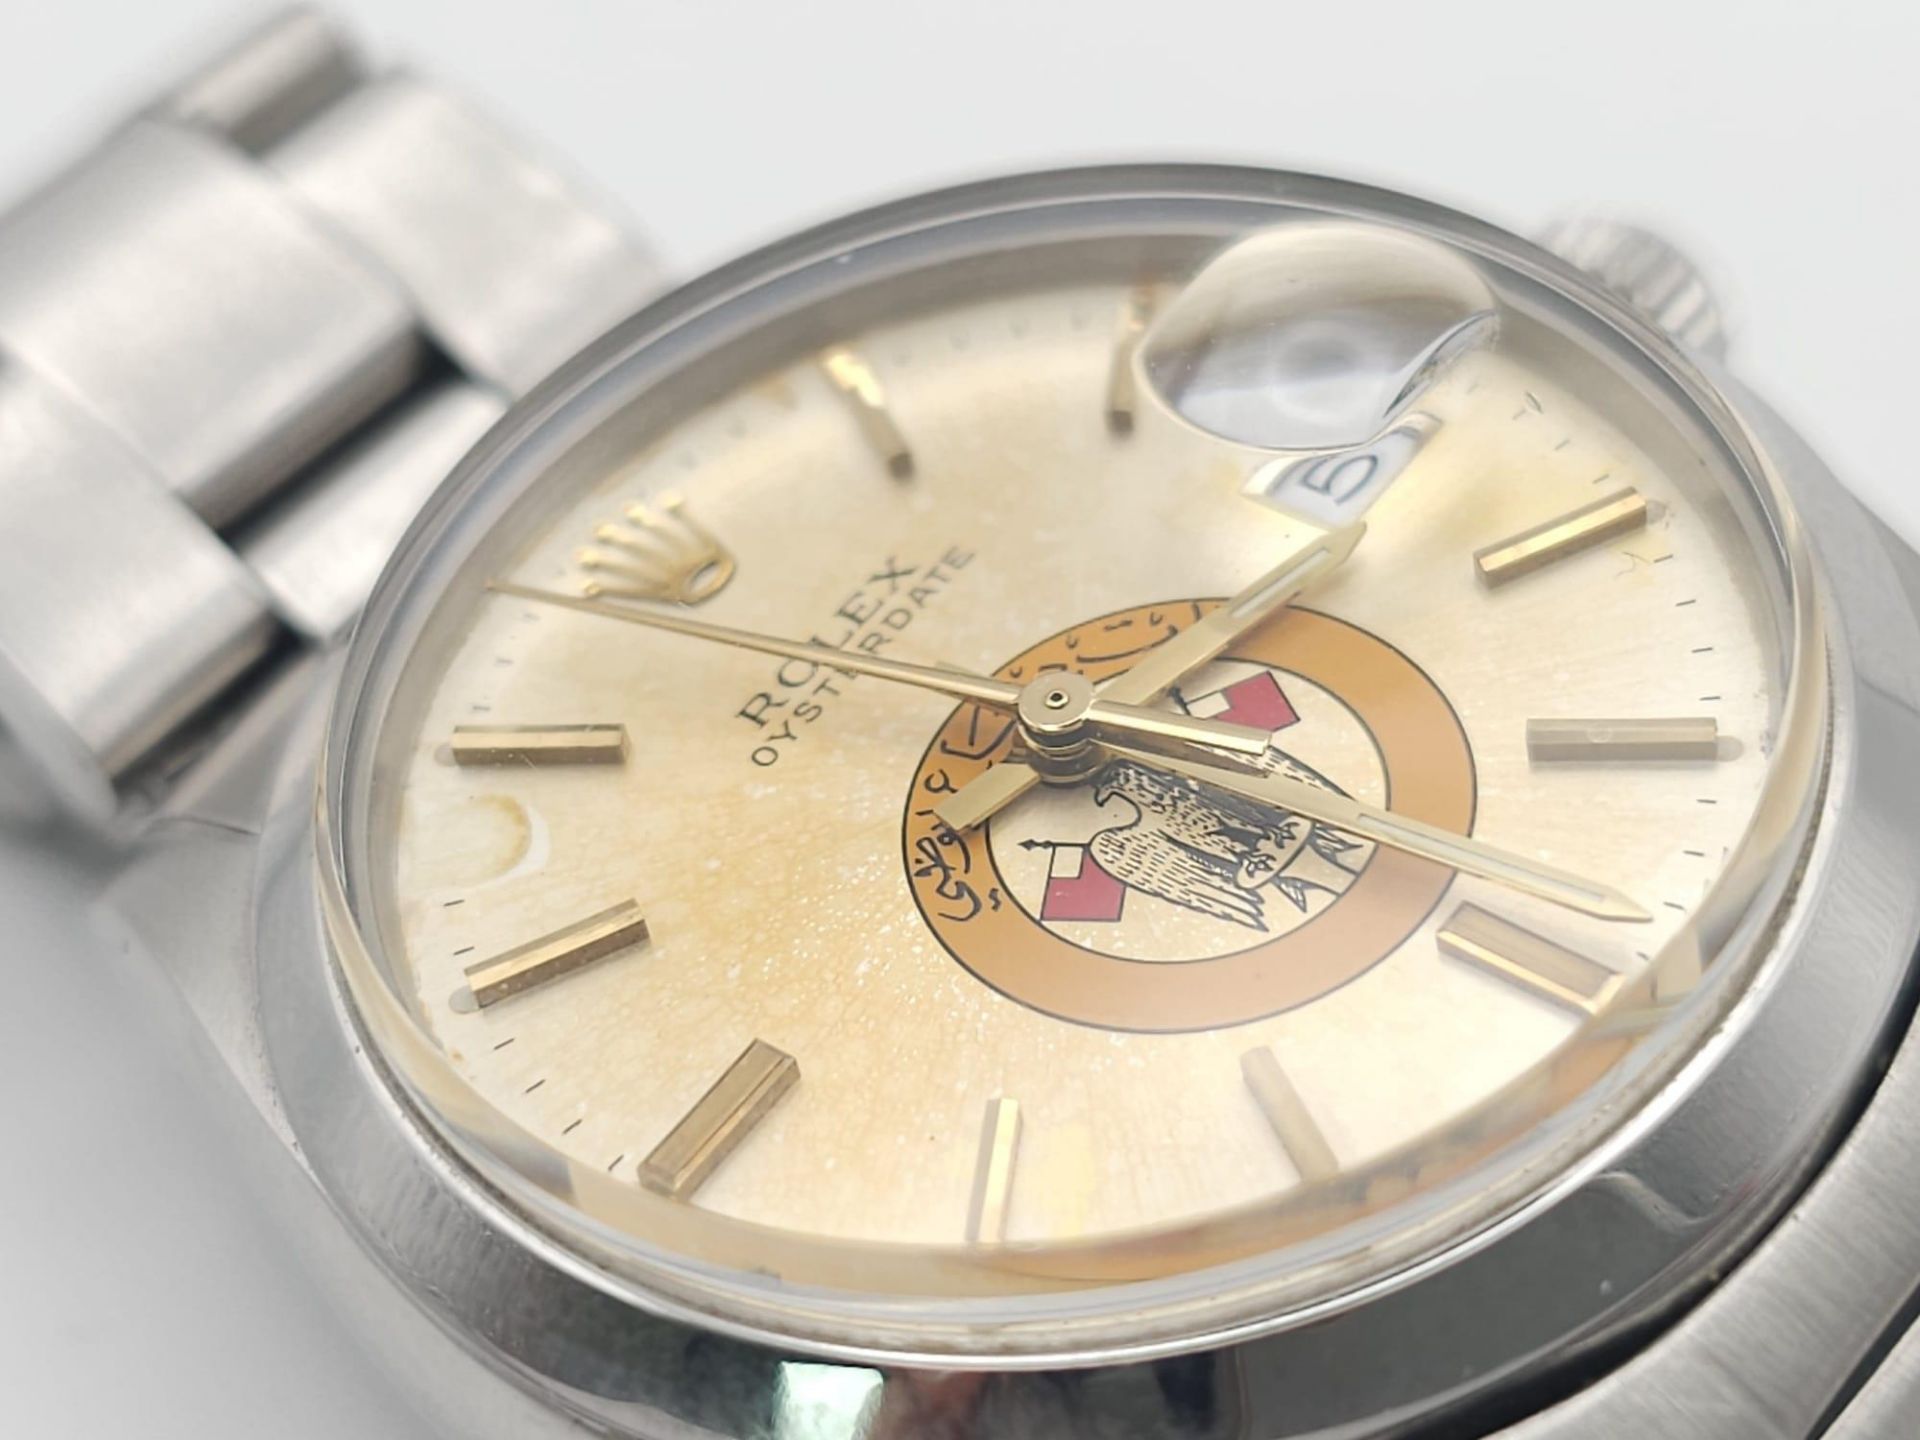 A ROLEX OYSTERDATE IN STAINLESS STEEL SPORTING THE EAGLE LOGO OF ABU DHABI .(DIAL NEEDS CLEANING) - Image 6 of 13